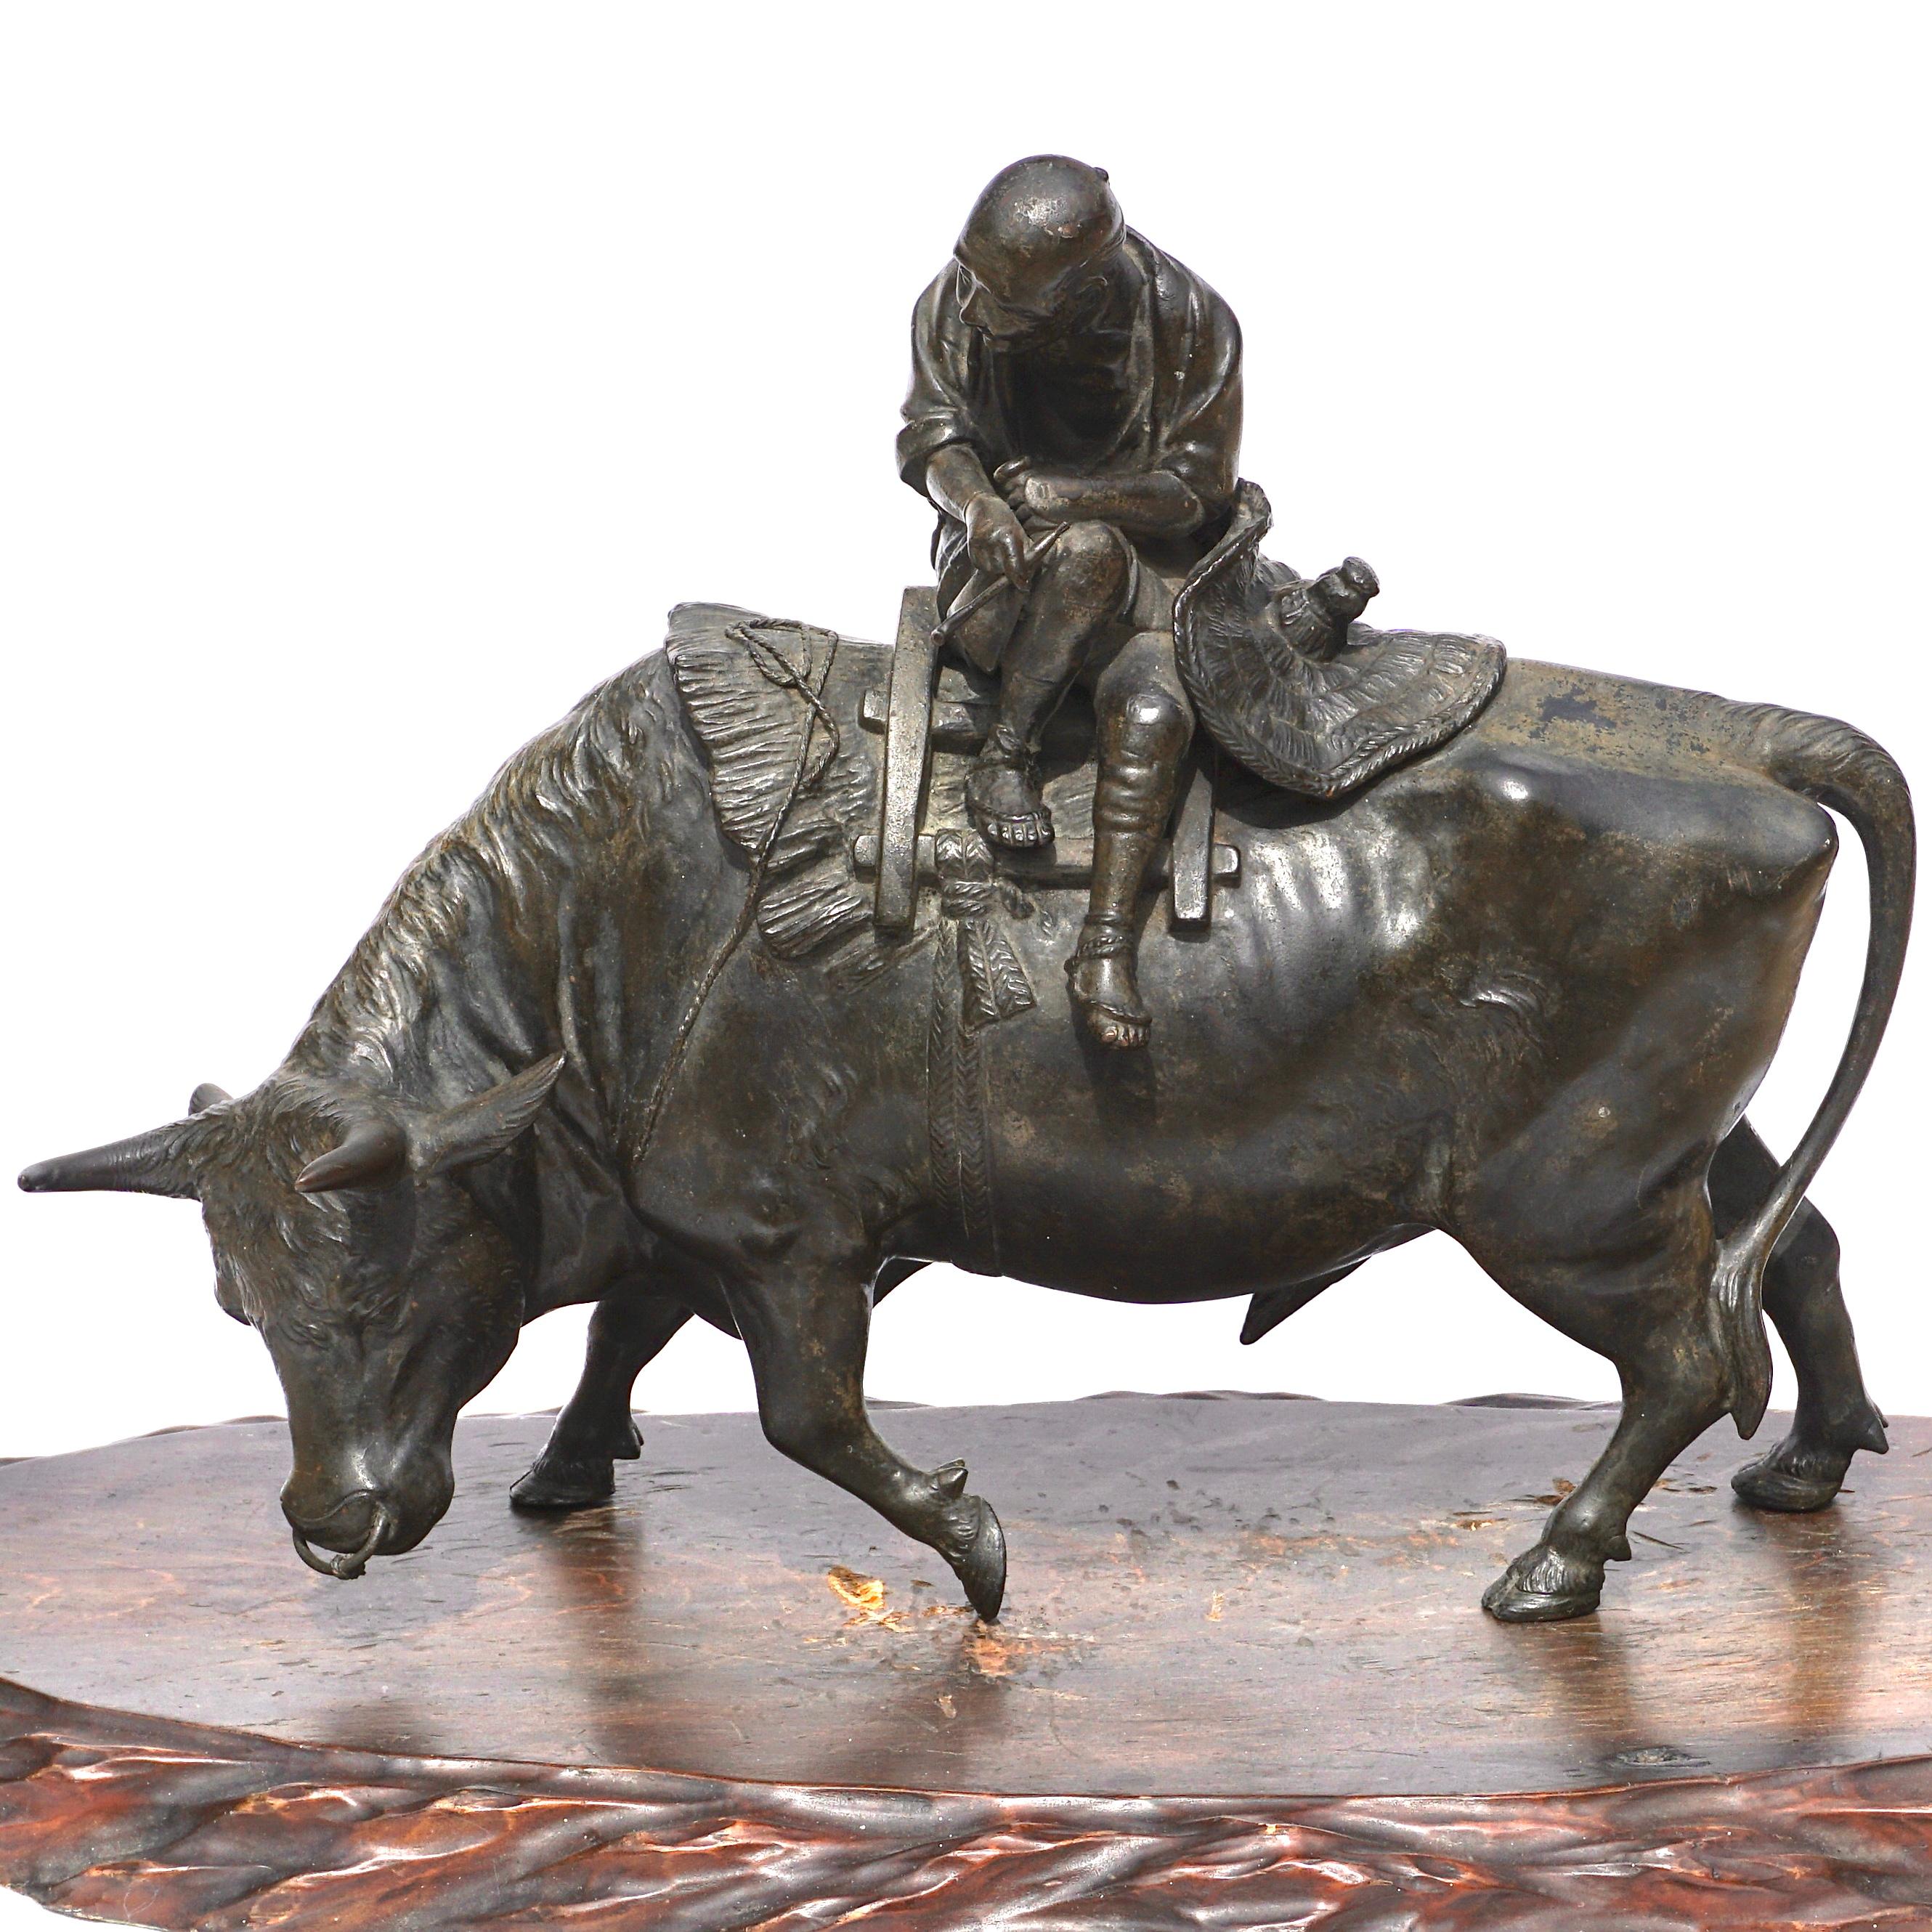 A very large 19th century fine Japanese bronze depicting an old man with a pipe sitting of a Ox or water buffalo. The figures show movement and character with historical and cultural significance, circa 1890.

Signed near penis.

Measures: Height